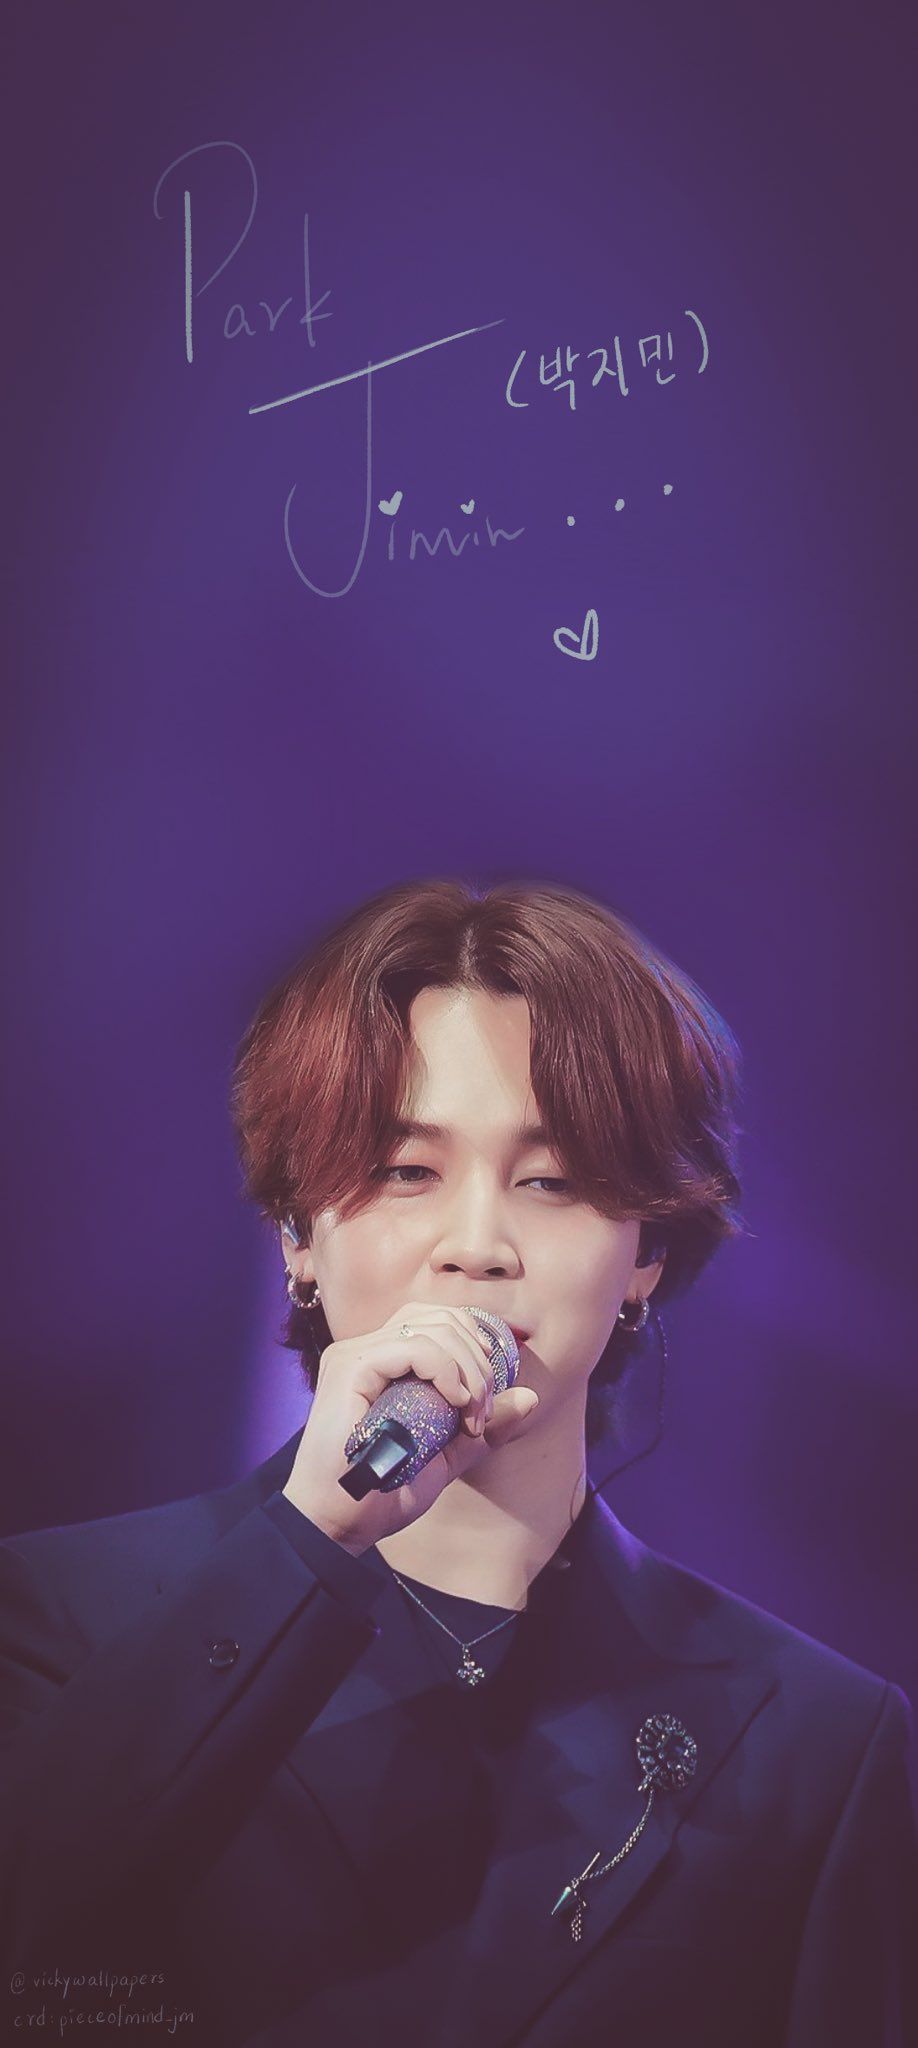 Jimin Wallpapers I Made For My Phone Bts Jimin Bts Wallpaper Jimin Bts - Jimin